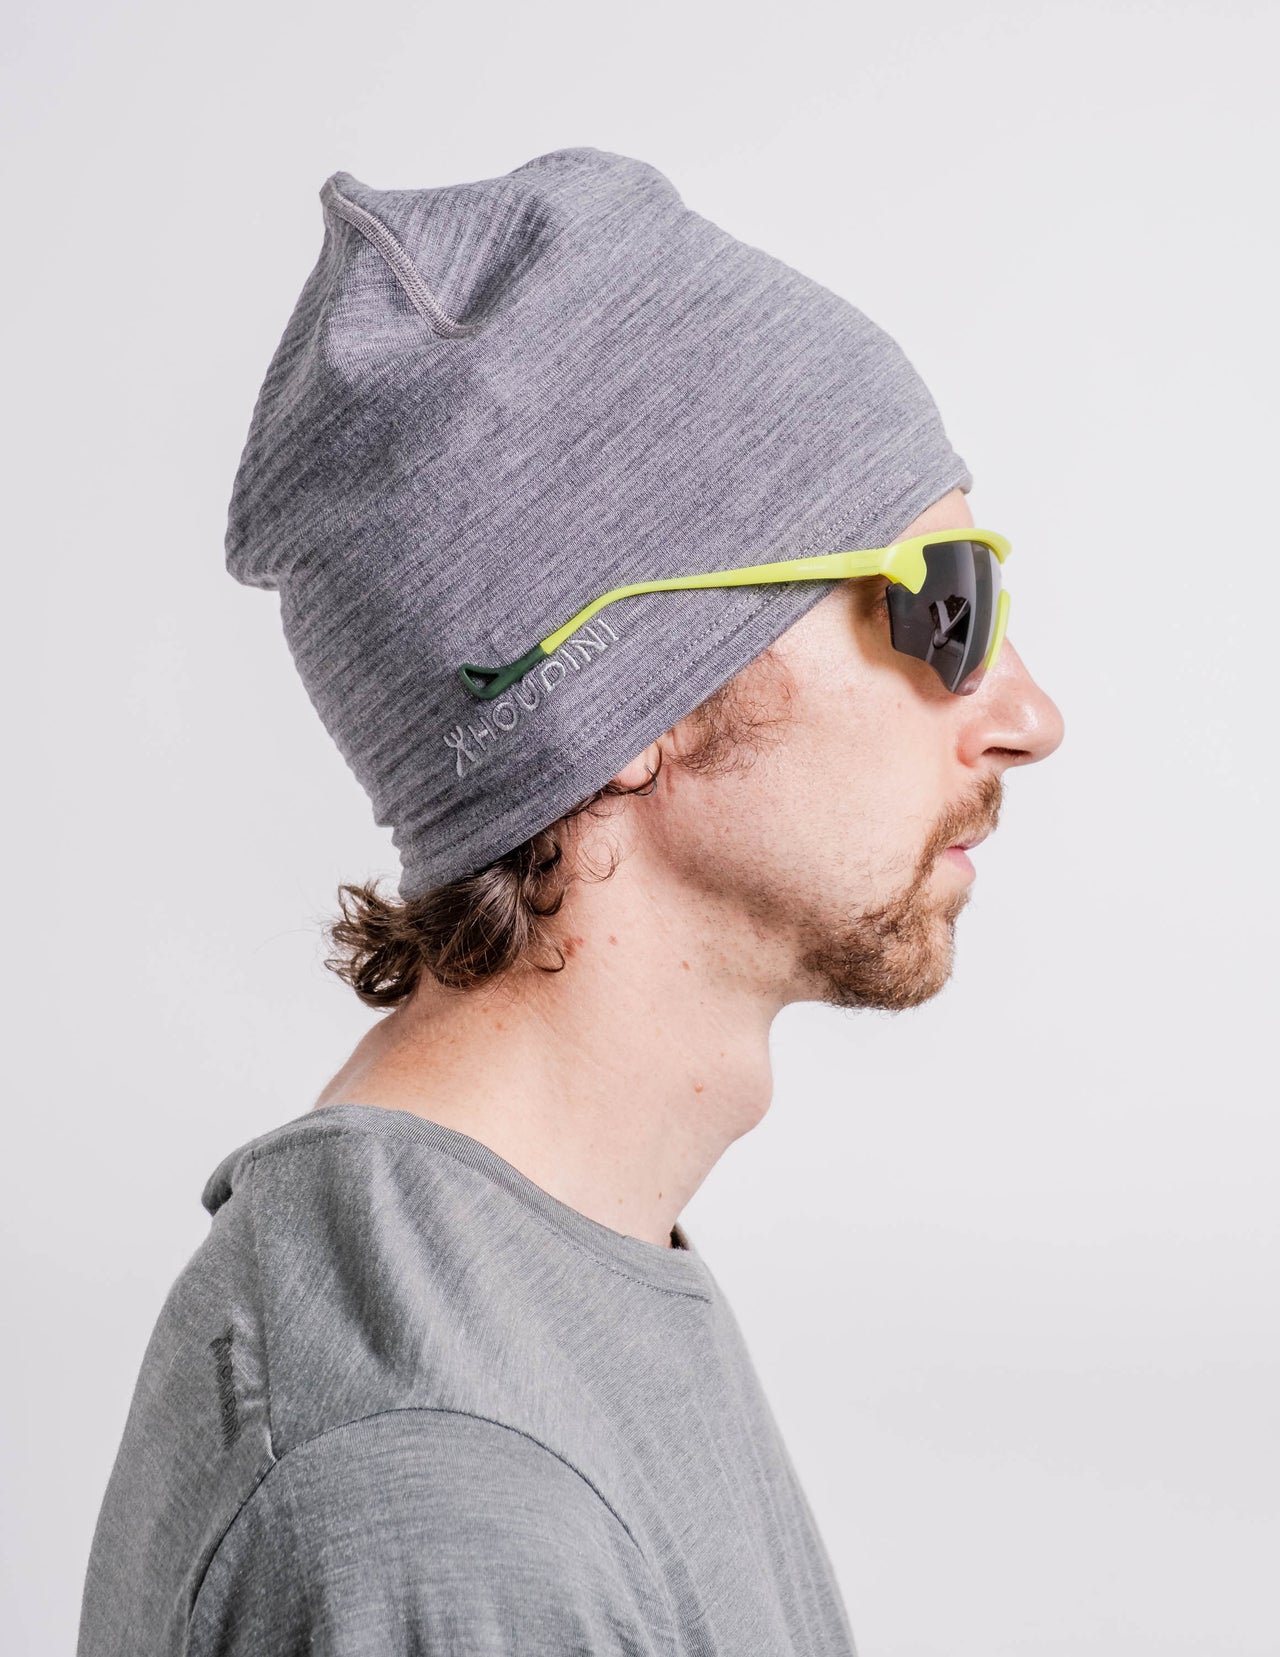 Desoli Thermal Hat in College Grey